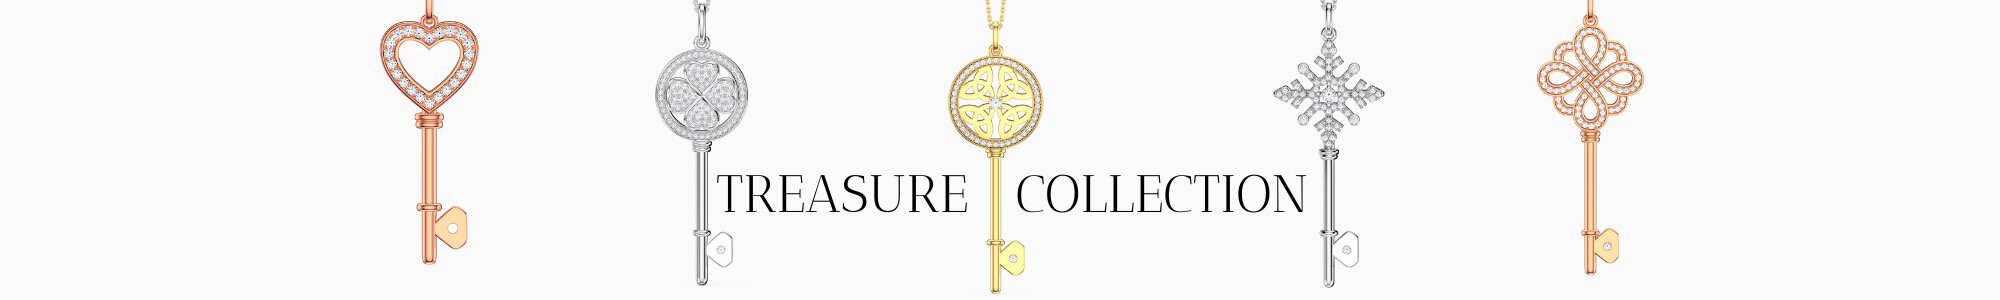 The Treasure Jewelry Collection